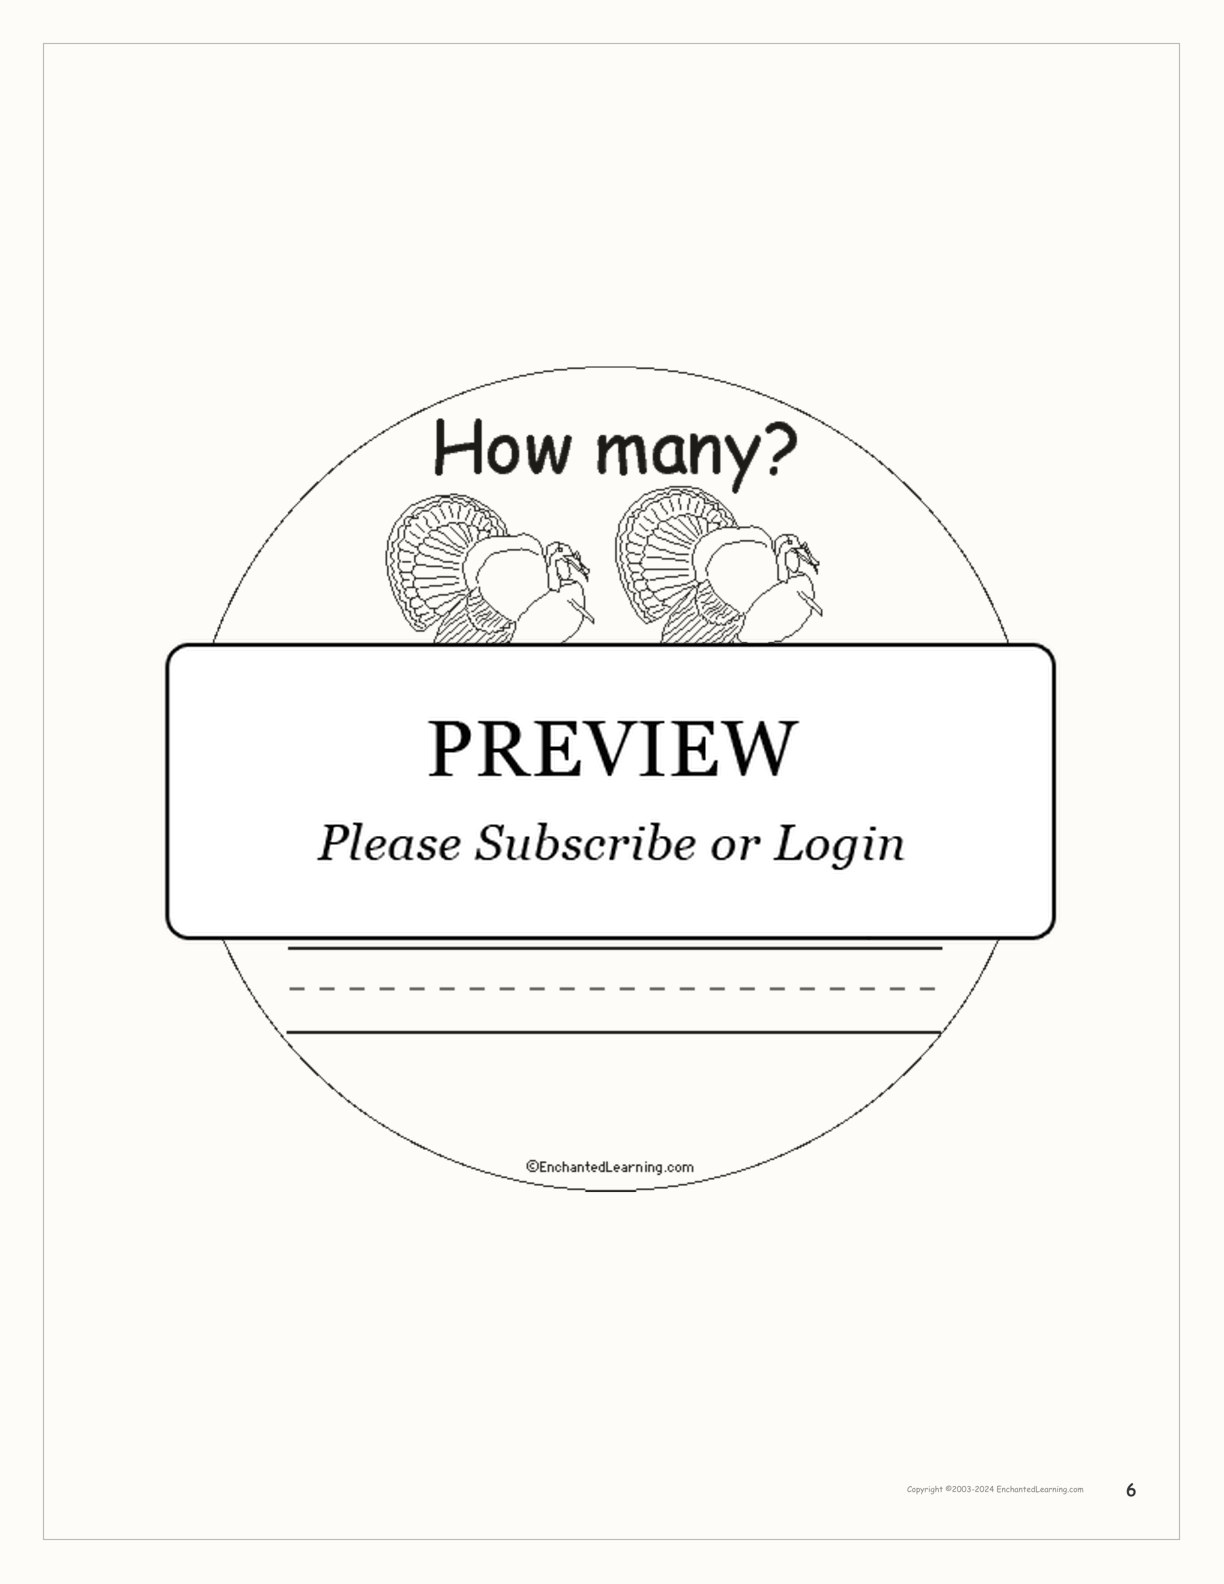 How Many Turkeys? interactive printout page 6